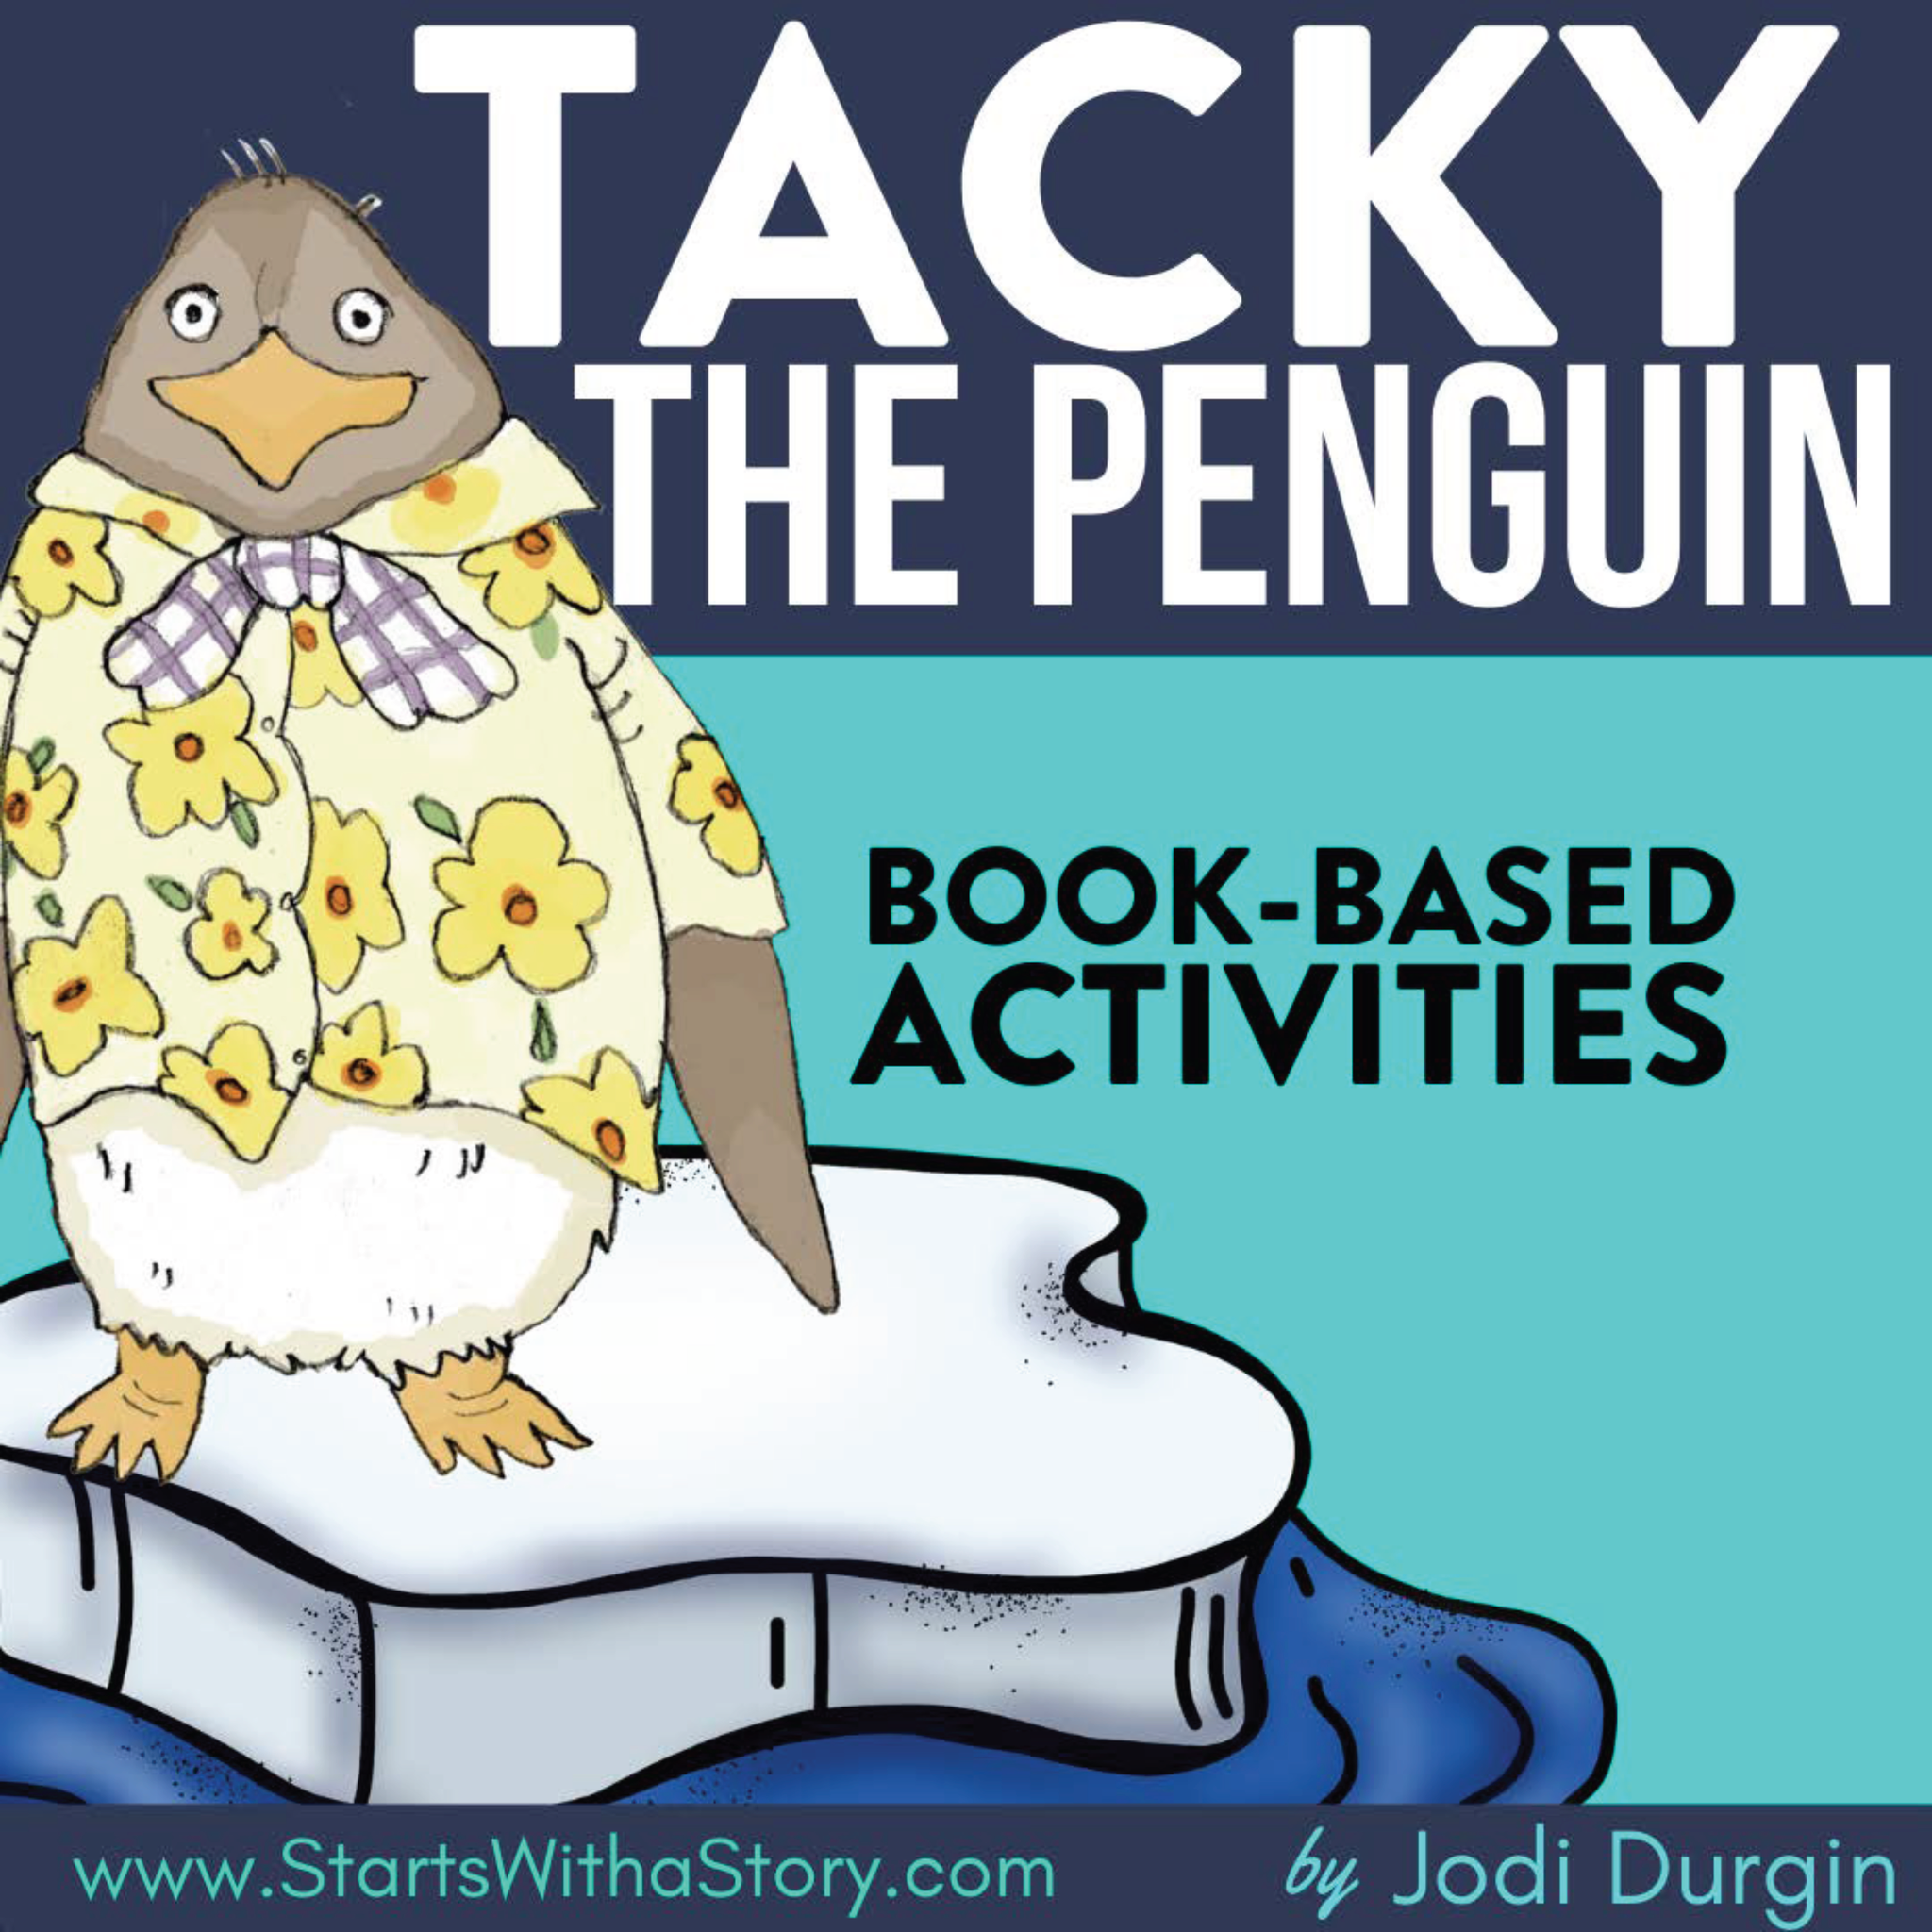 TACKY THE PENGUIN activities and lesson plan ideas